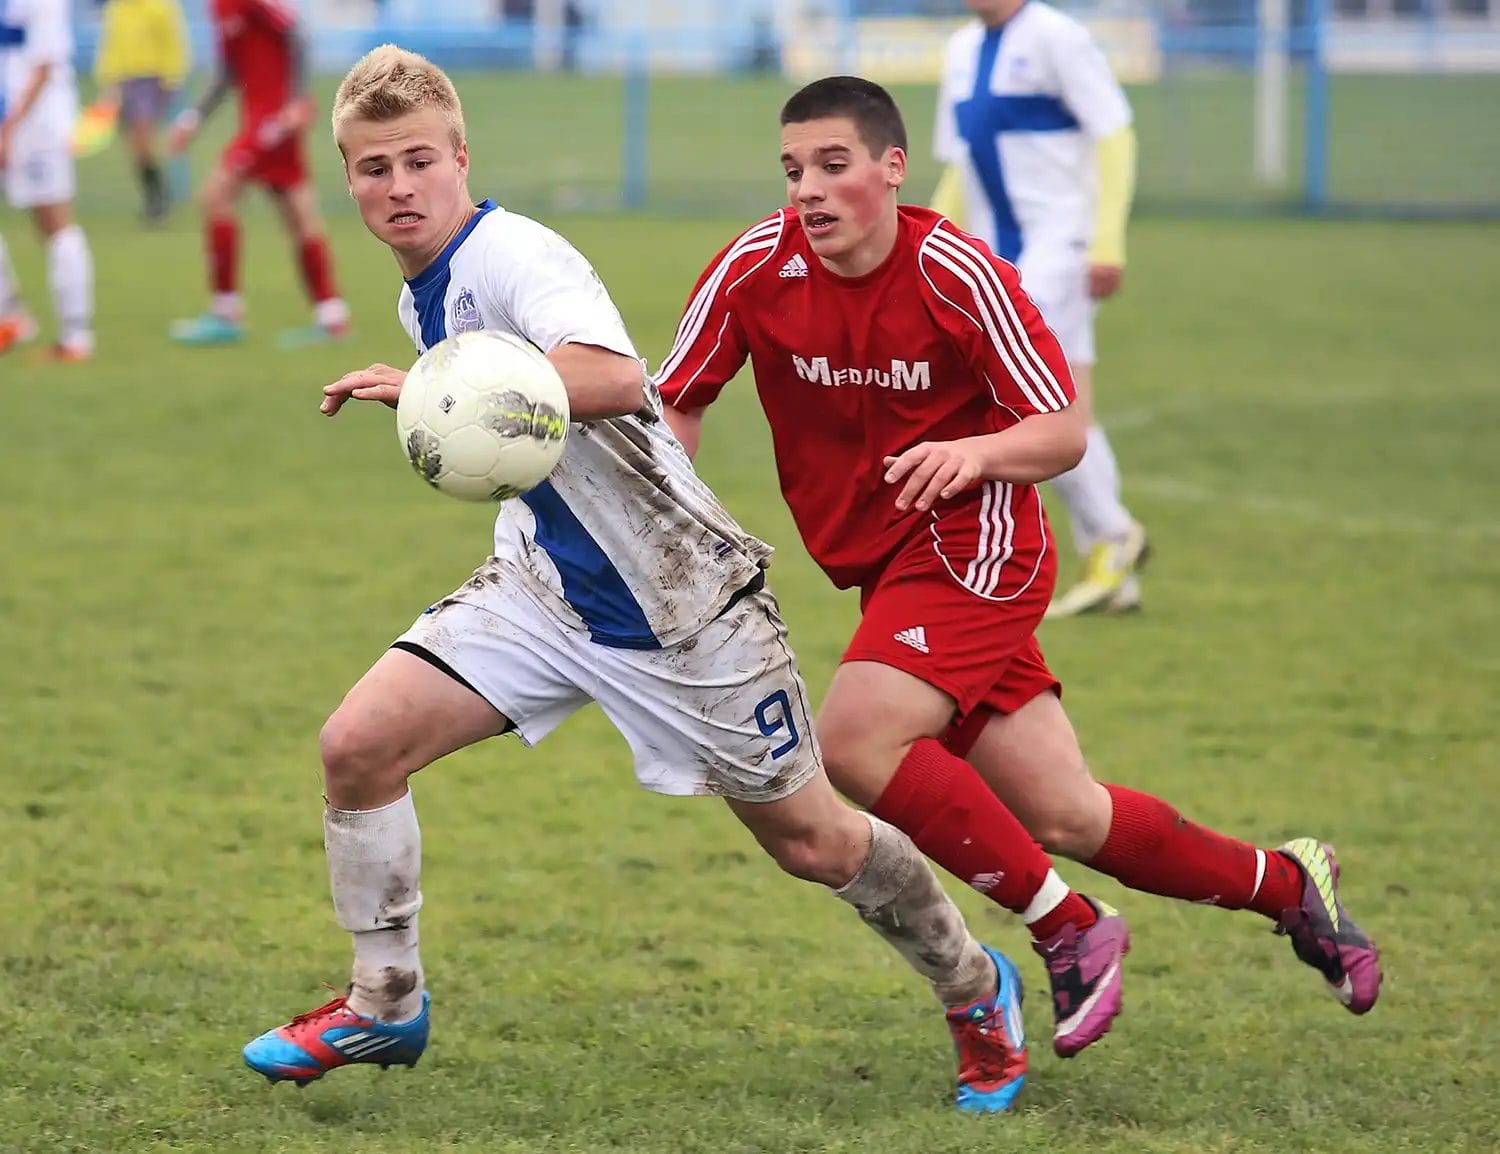 two football players competing for the ball. One is wearing white and blue, the other is in a red football kit